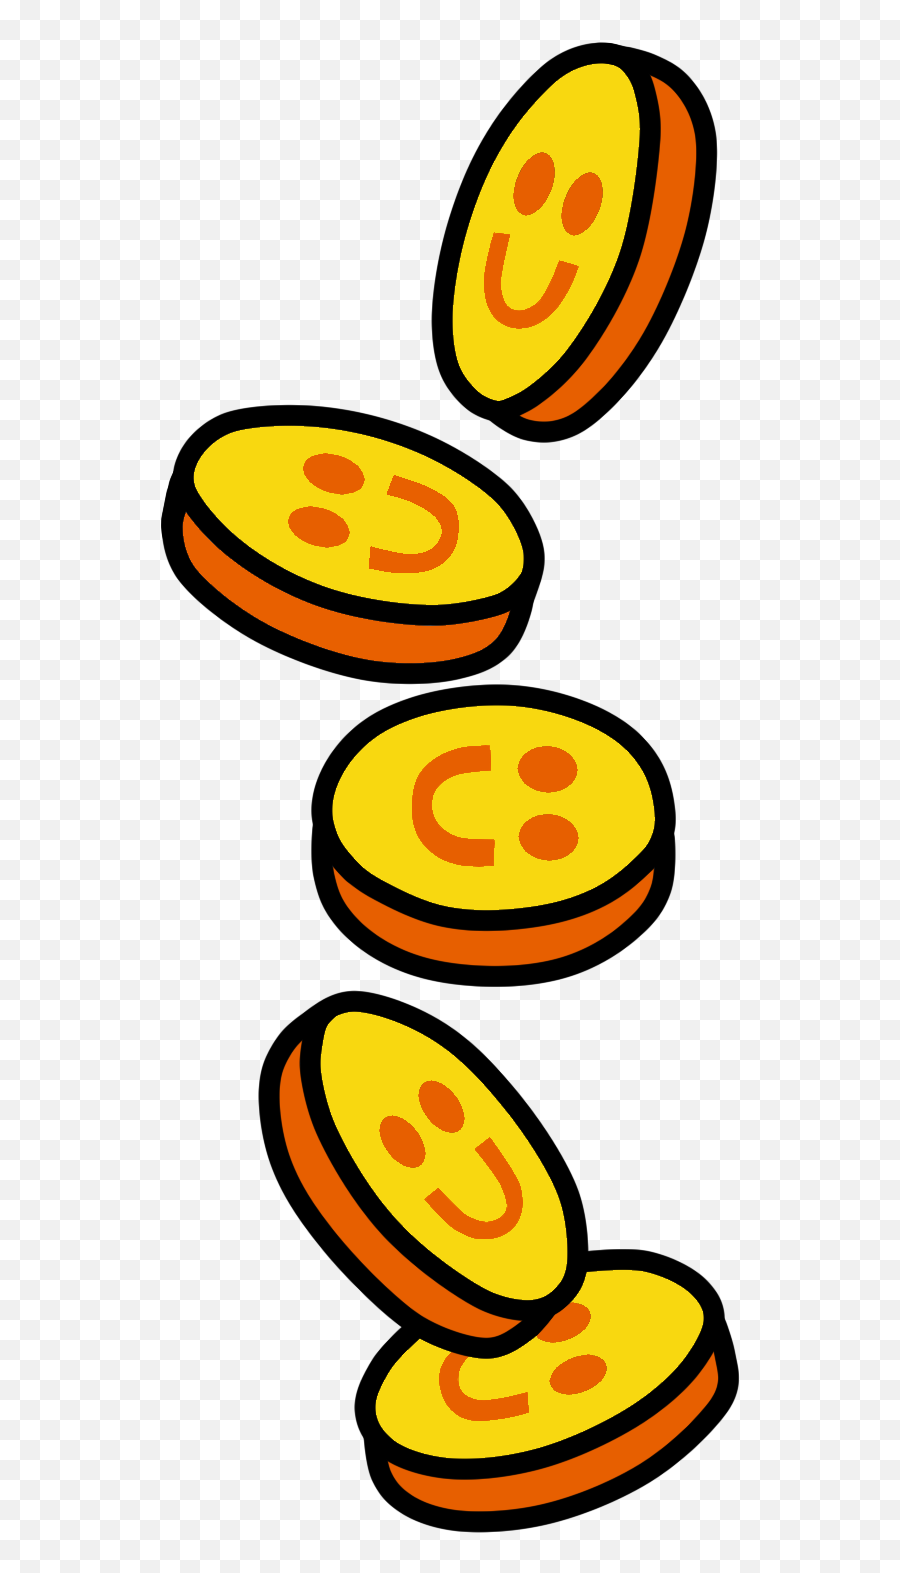 Image Transparent Download Coin Flip - Rhythm Heaven Coin Toss Png,Coin Flip Icon